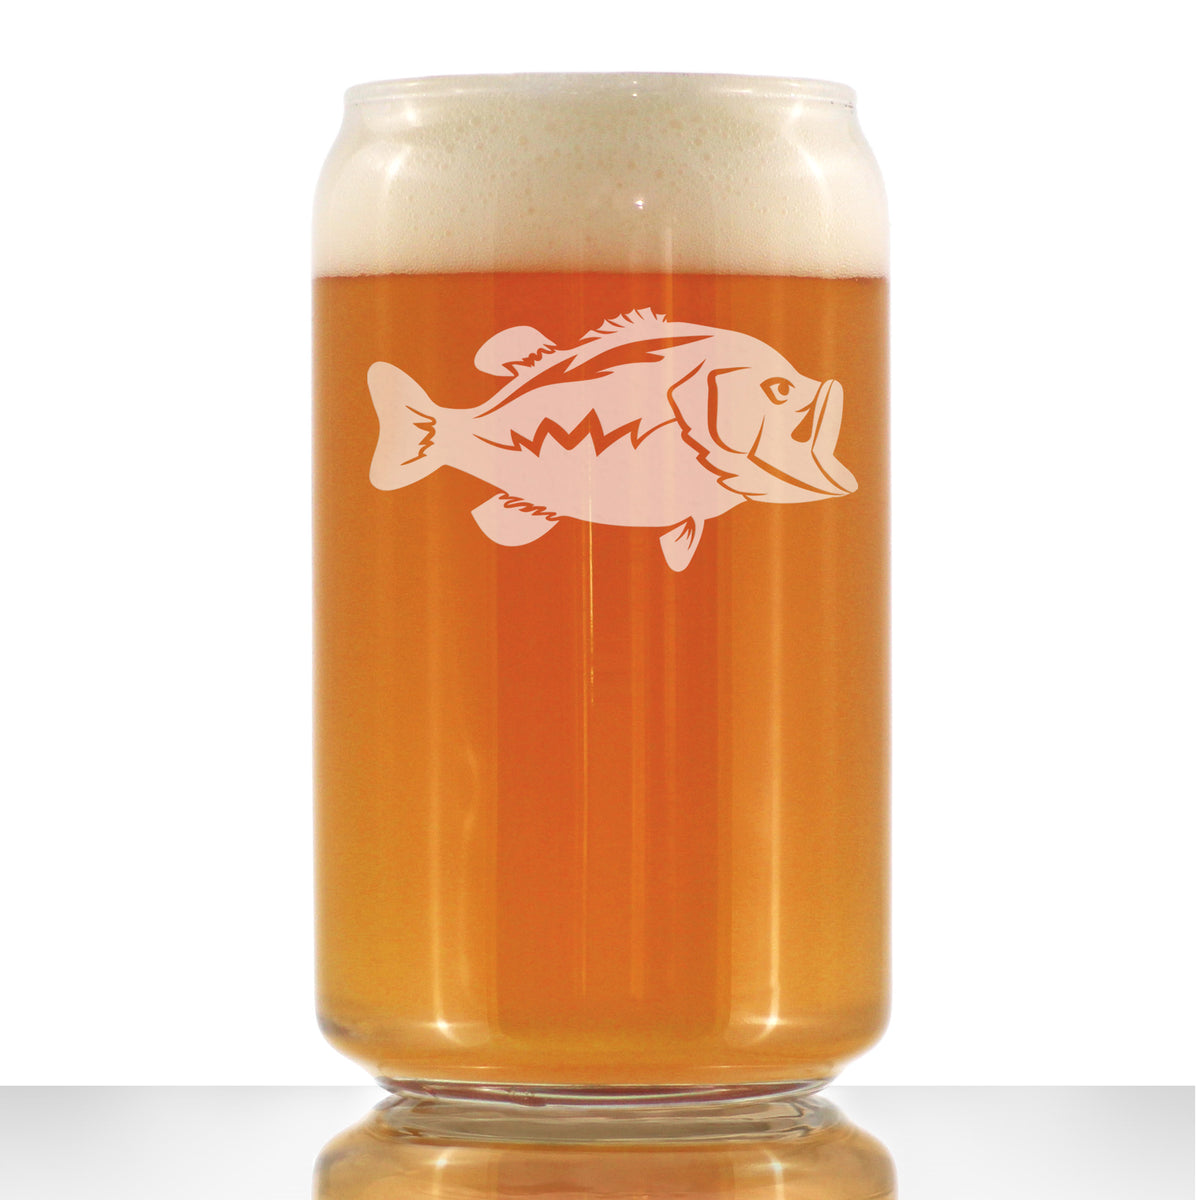 Largemouth Bass - Beer Can Pint Glass - Bass Fishing Gifts for Fisherman - Fun Fish Cups &amp; Lake House Decor - 16 oz